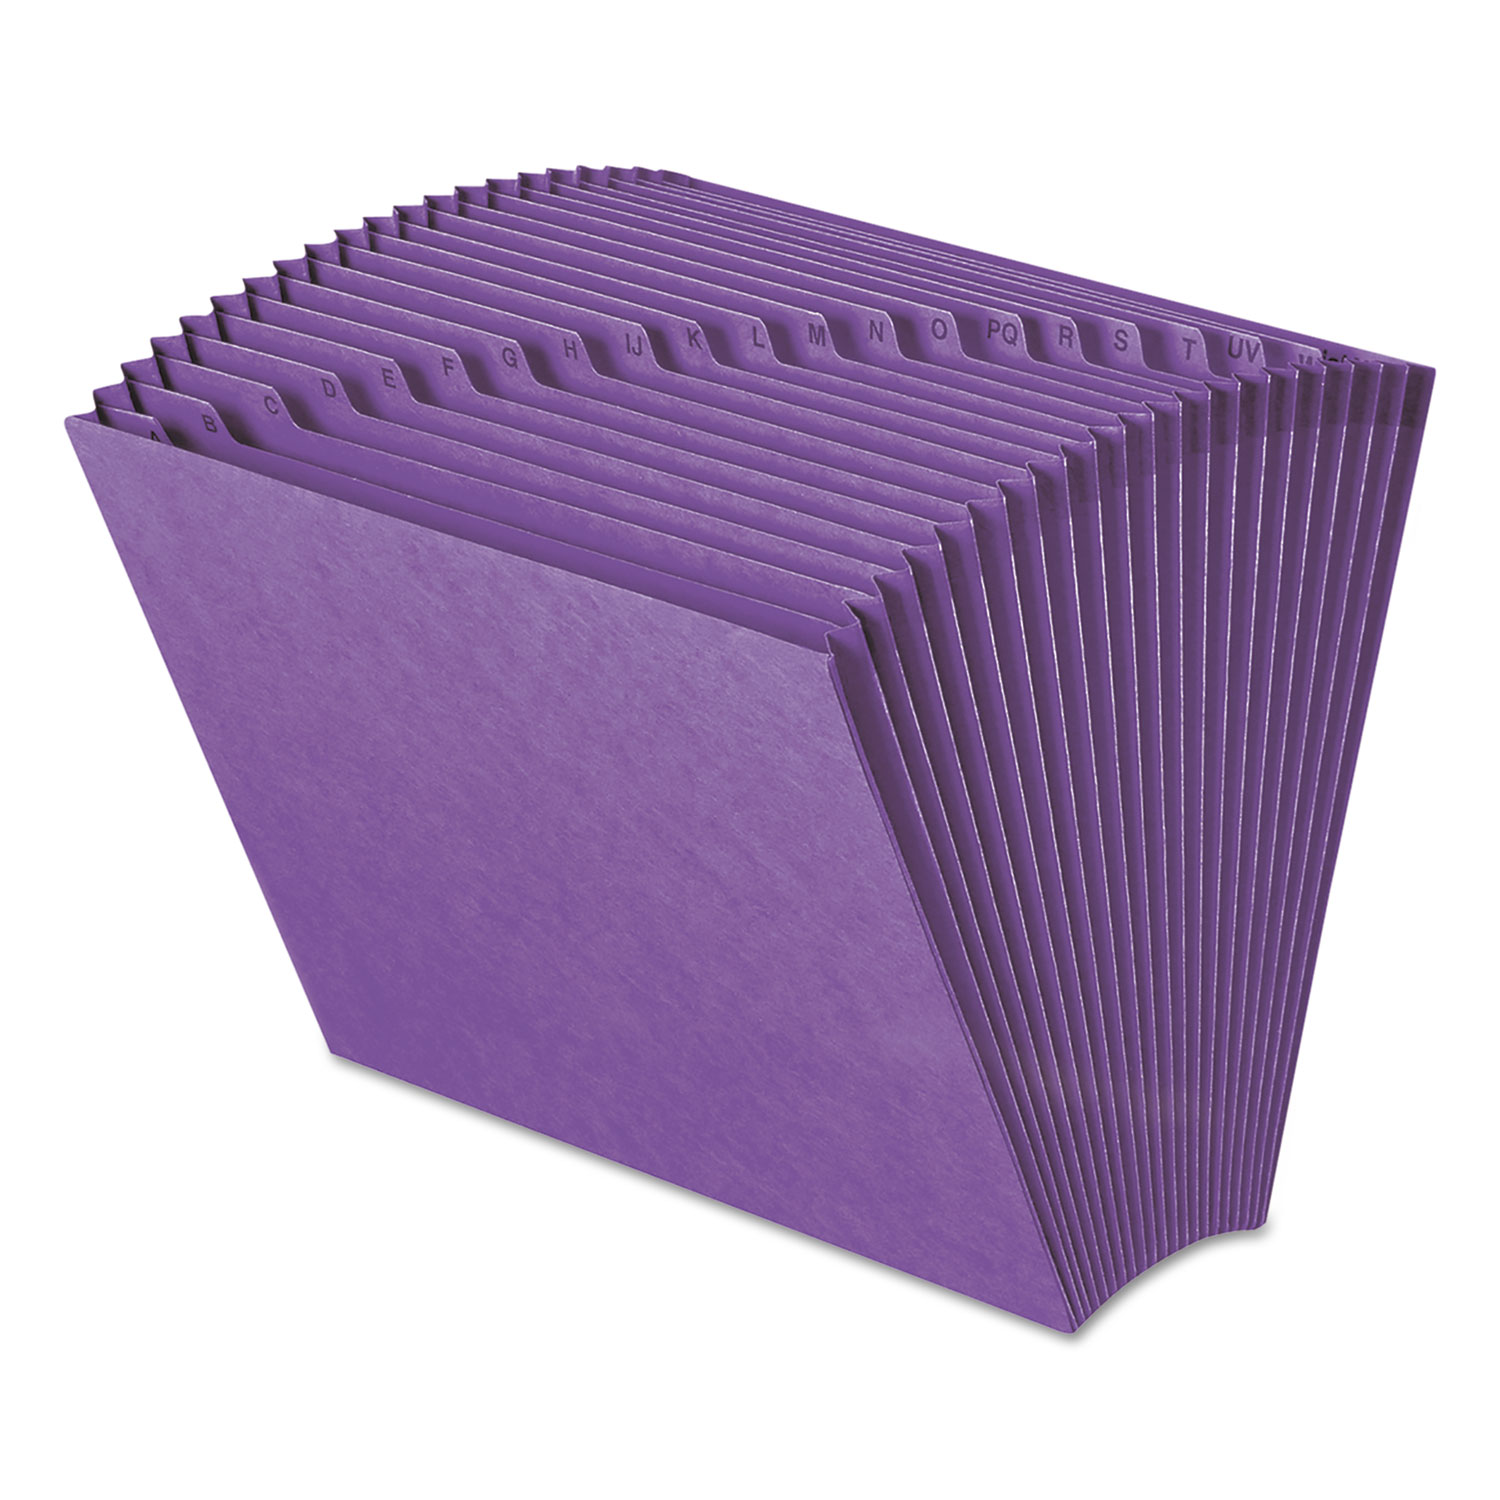  Smead 70721 Heavy-Duty Indexed Expanding Open Top Color Files, 21 Sections, 1/21-Cut Tab, Letter Size, Purple (SMD70721) 